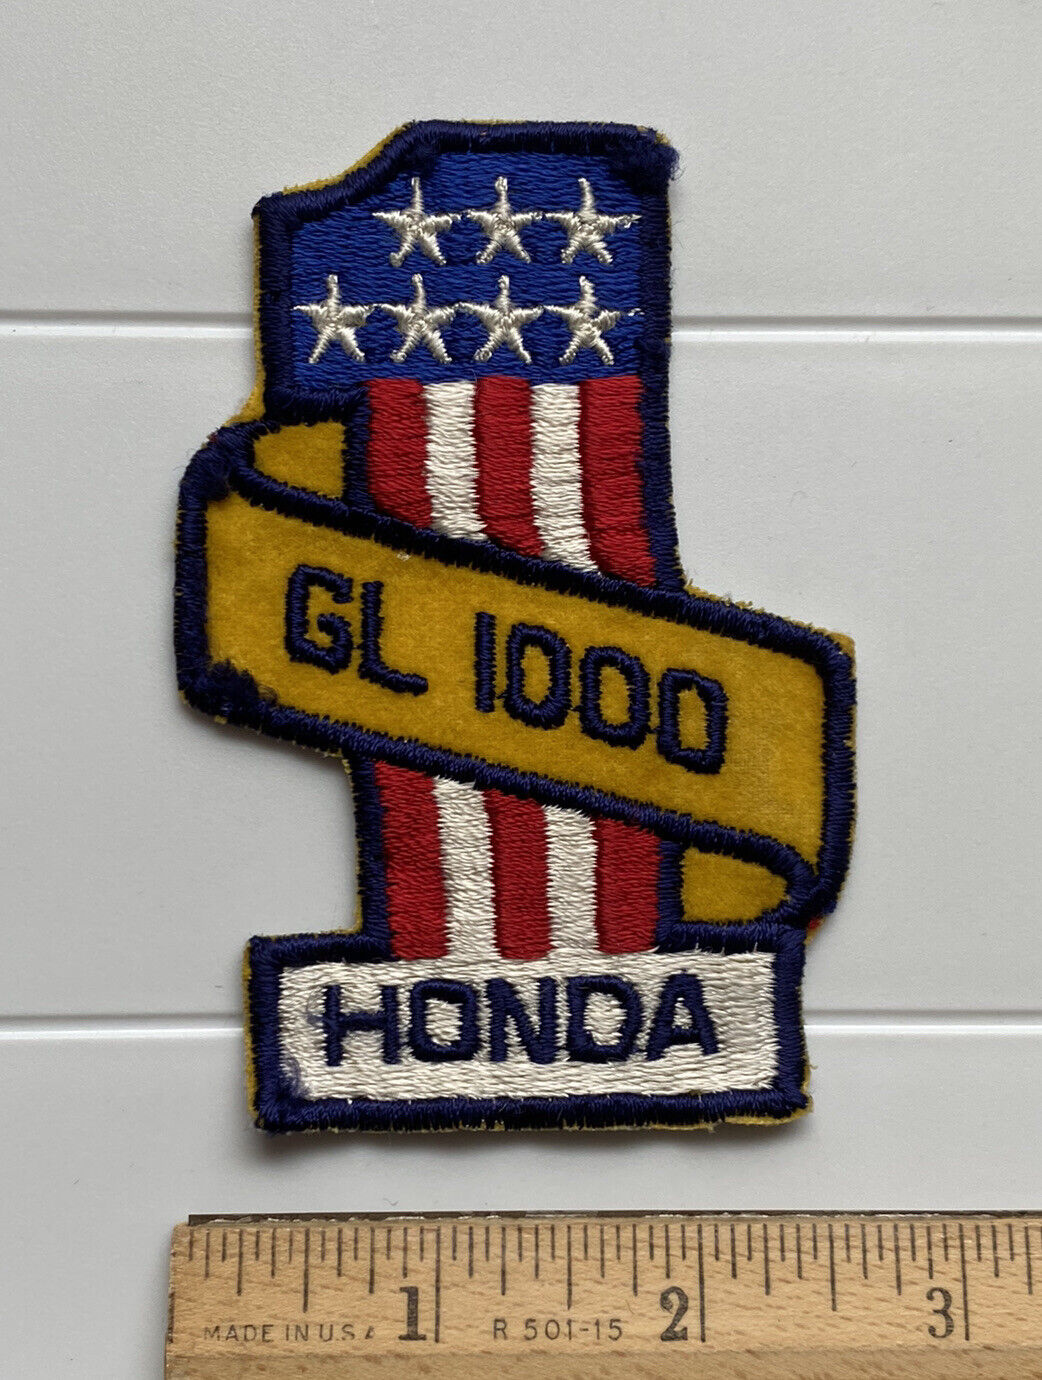 Honda GL 1000 Gold Wing Touring Motorcycle #1 American Flag Embroidered Patch